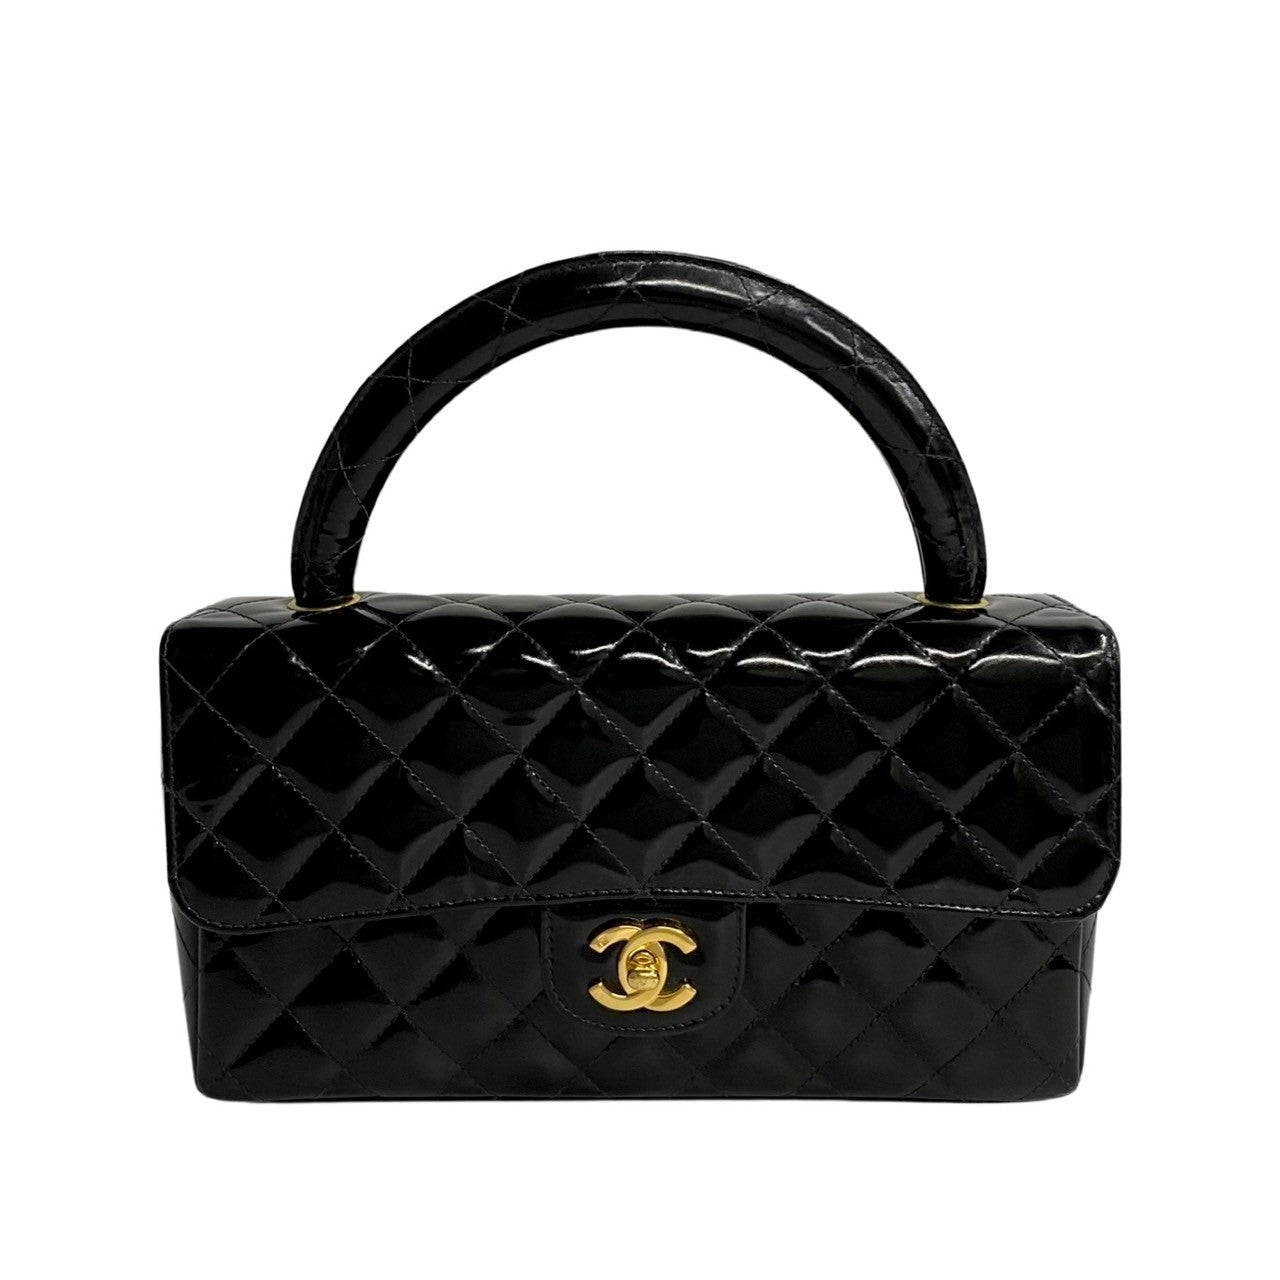 Quilted Patent Twin Top Flap Handbag